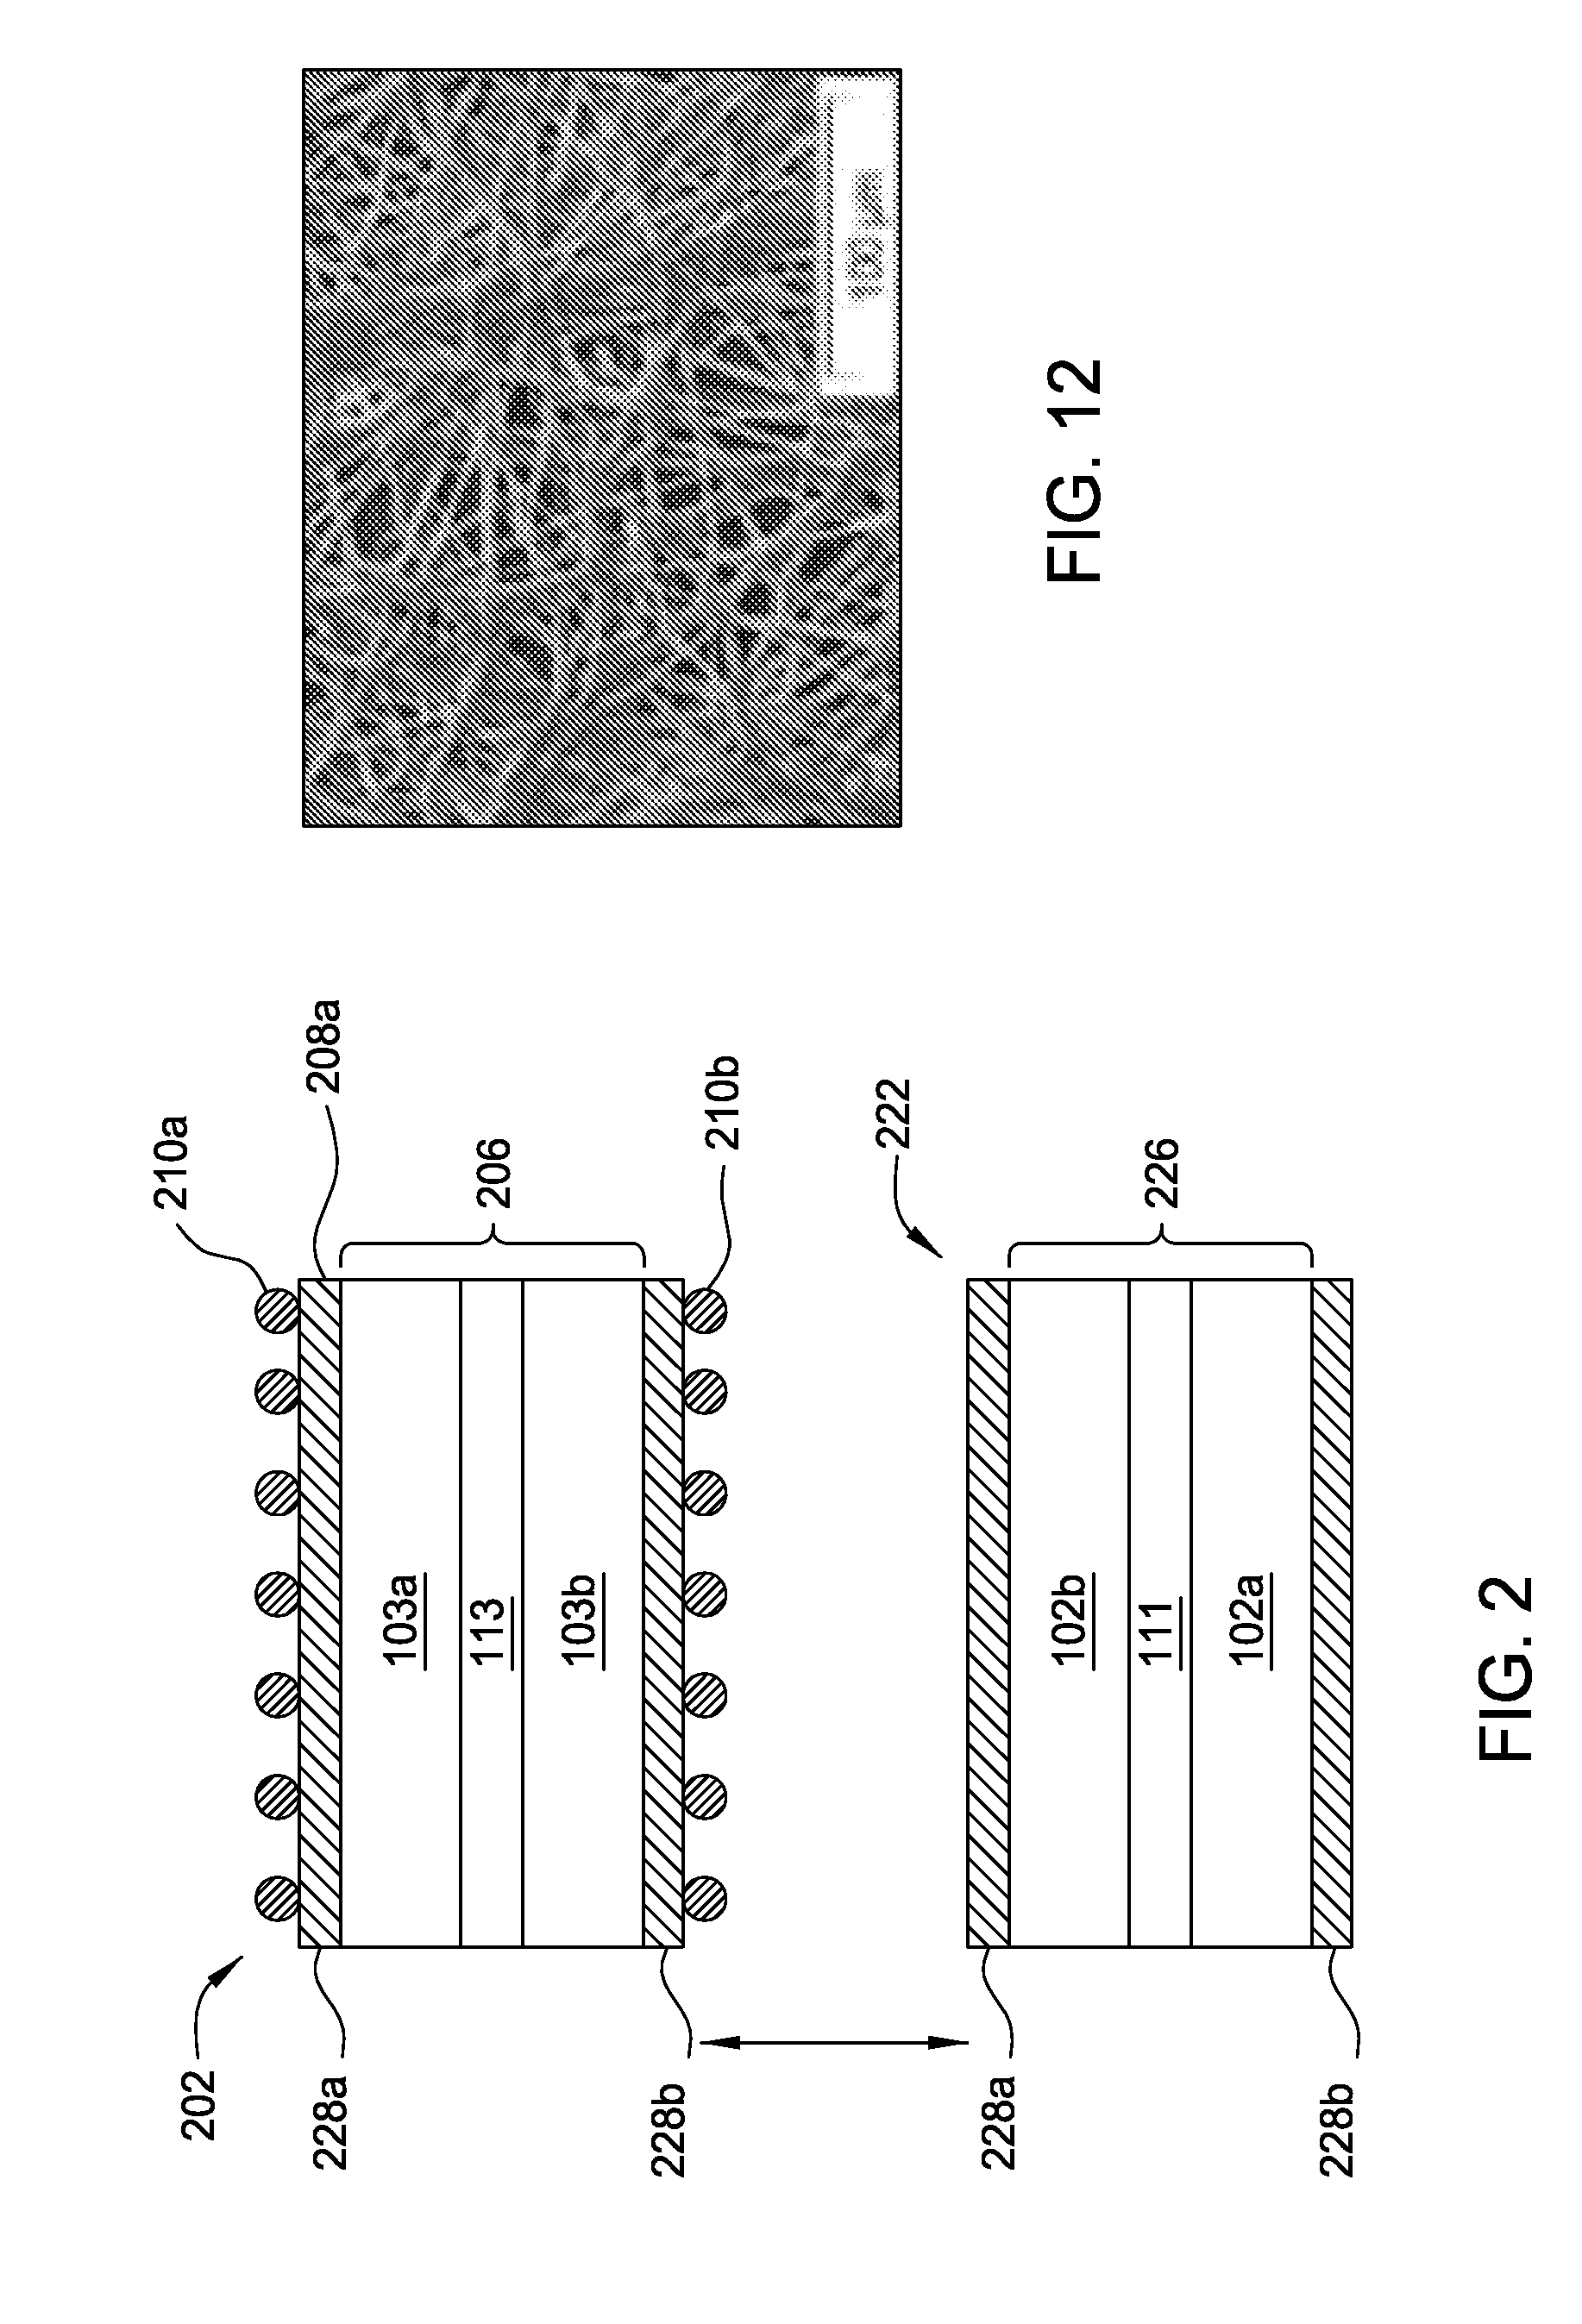 Integrated composite separator for lithium-ion batteries